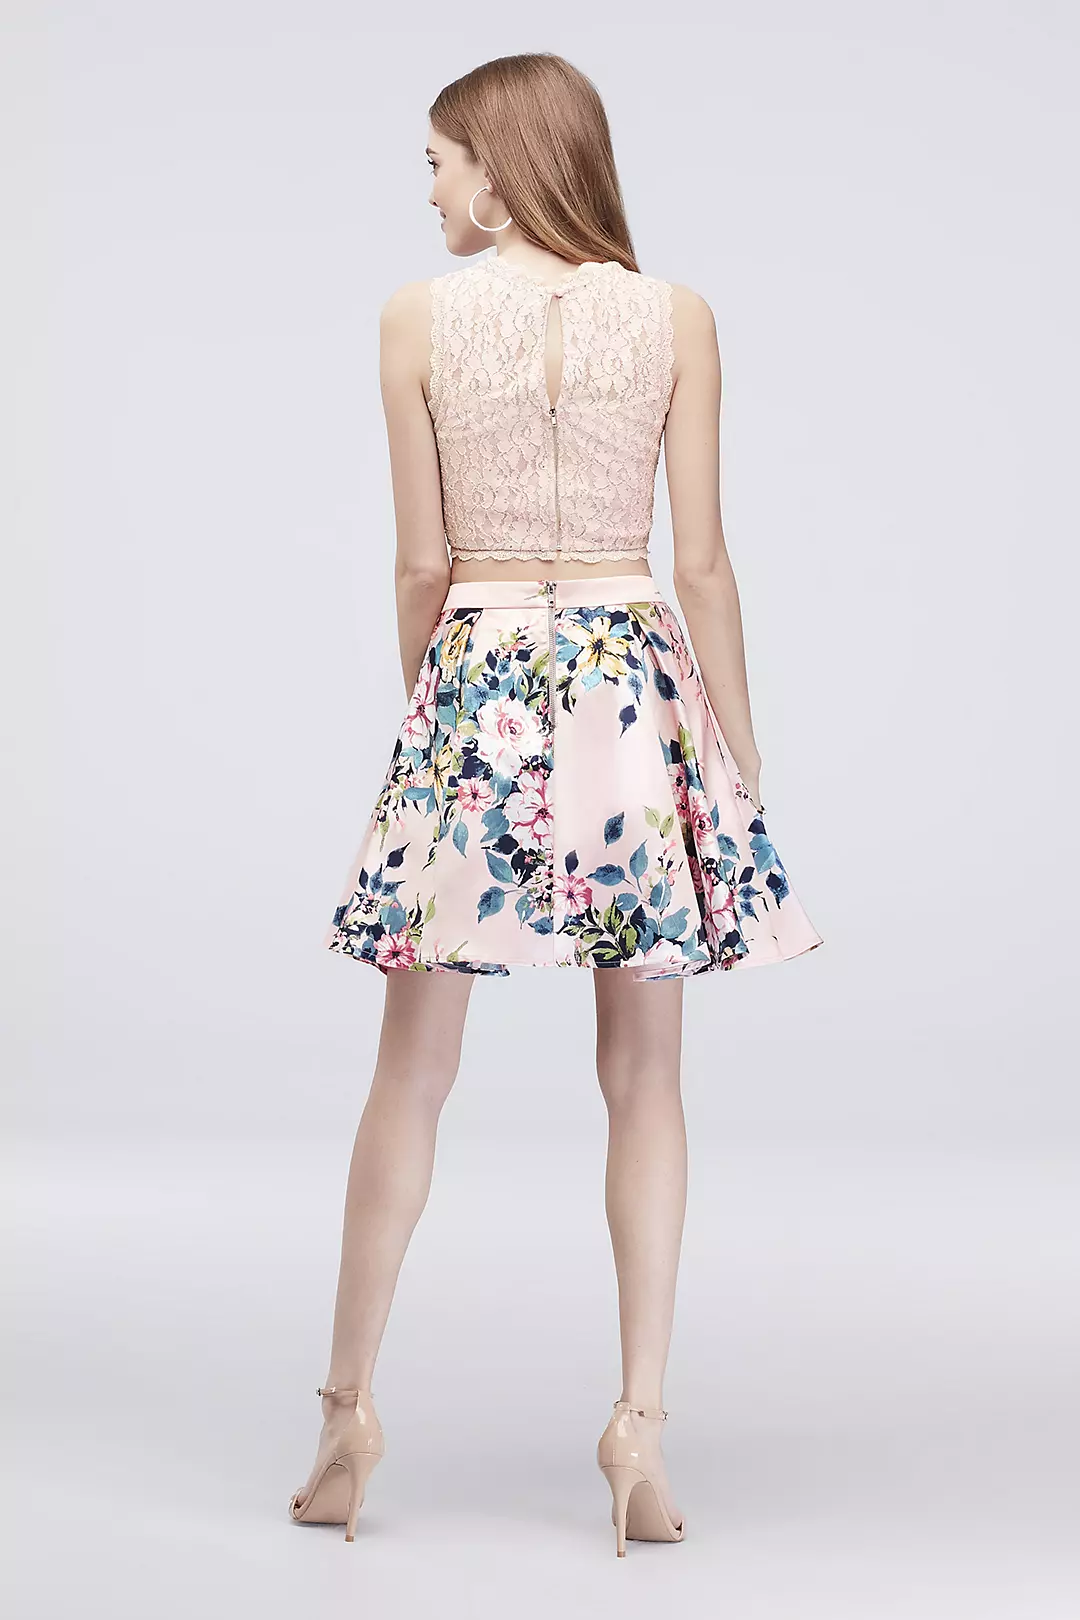 Glitter Lace Pleated Two-Piece Short Dress Image 2